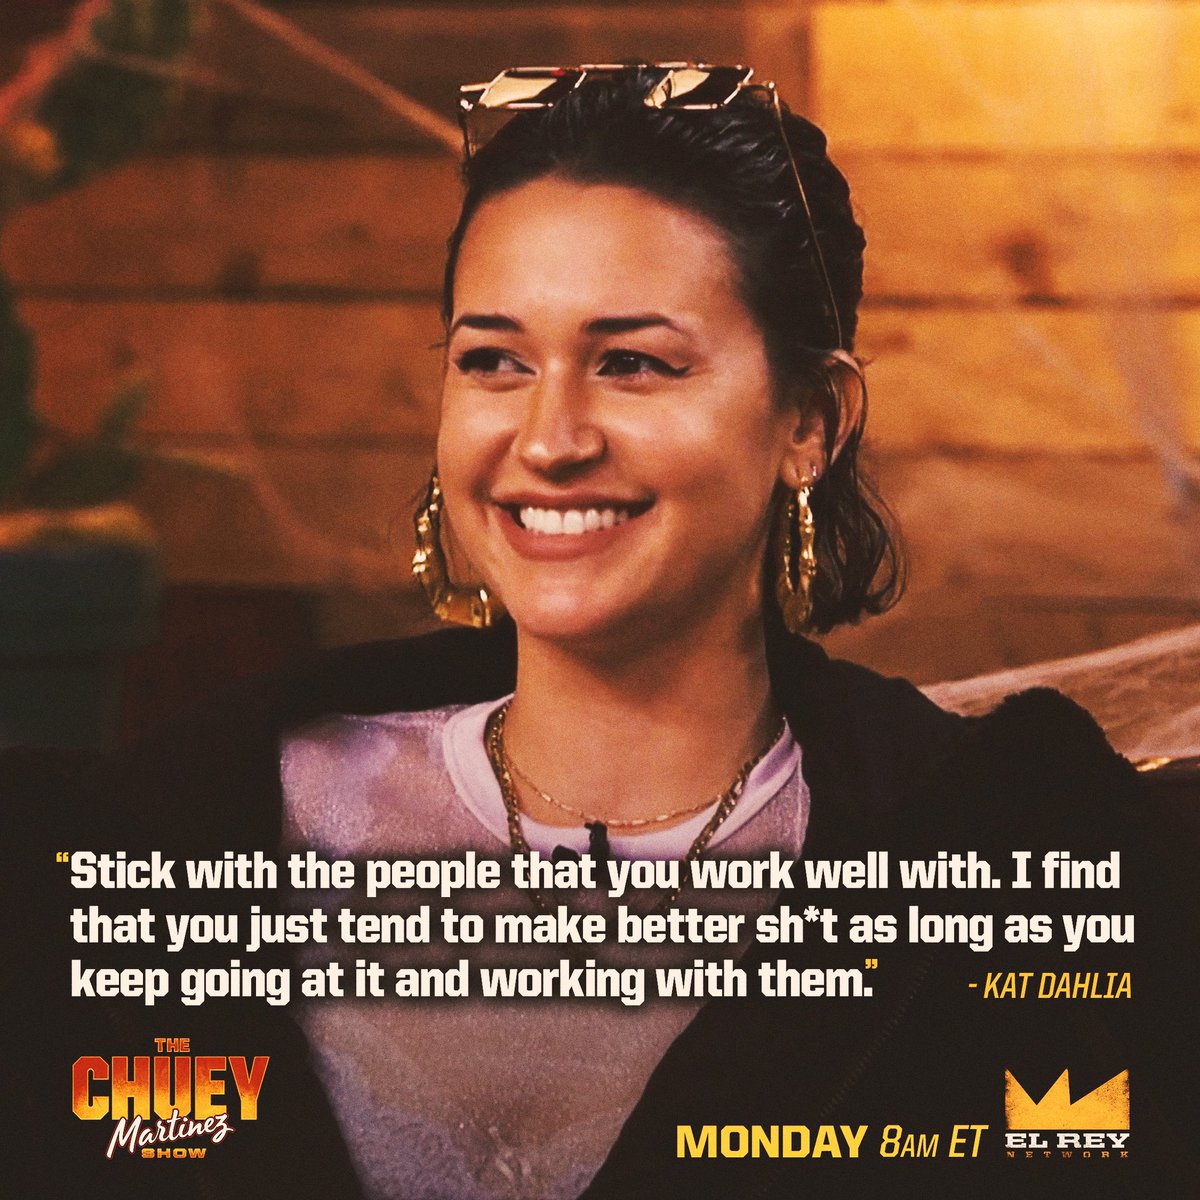 Start your Monday morning off with the The Chuey Martinez Show with guests Kat Dahlia, Wale, and Father Sebastiaan! Tune in at 8am ET on #ElReyNetwork